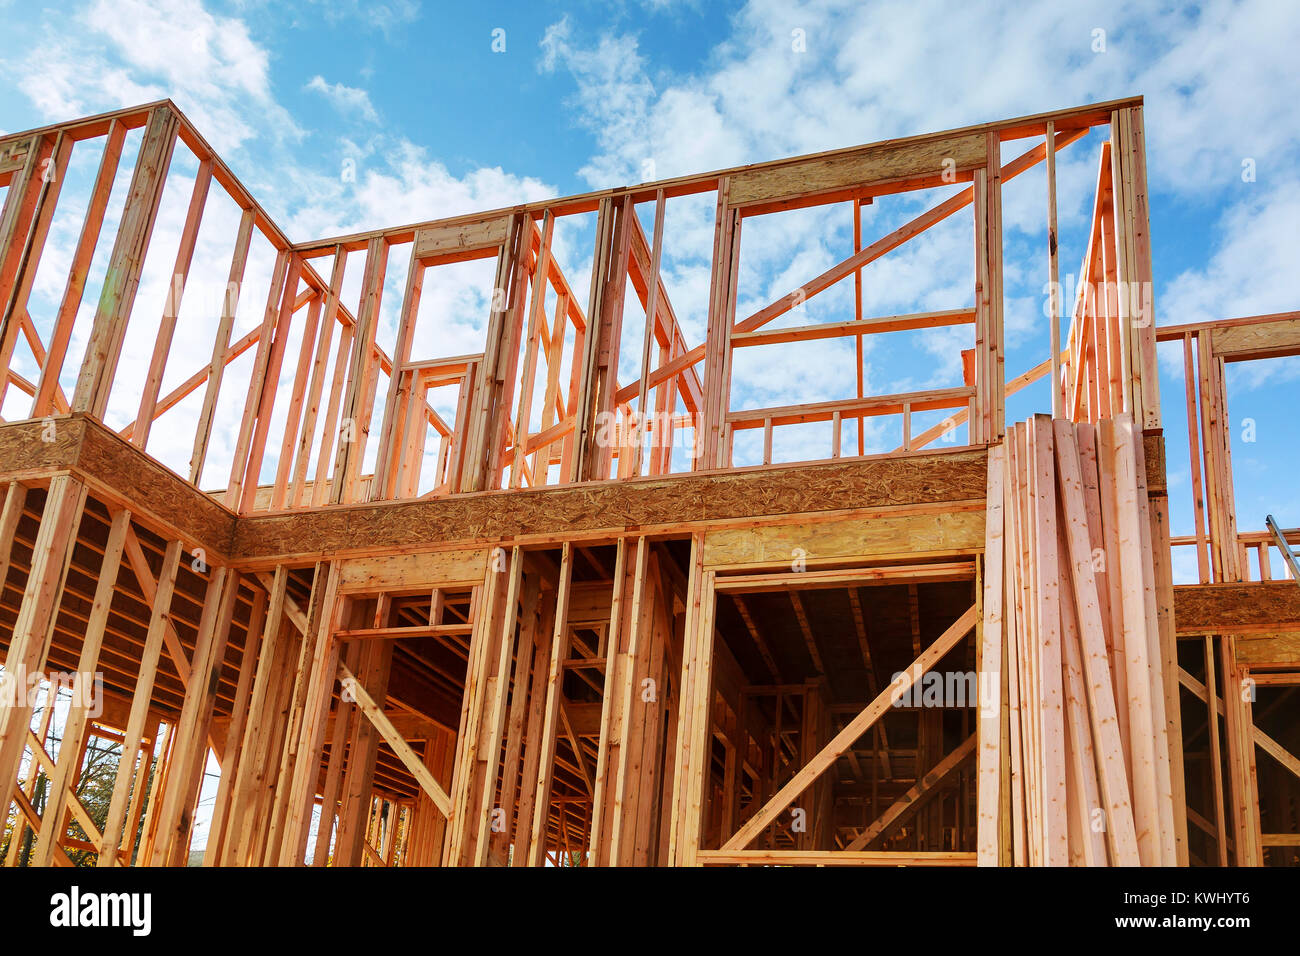 Framed New Construction of a House Building a new house Wooden framing of a home, full frame Stock Photo